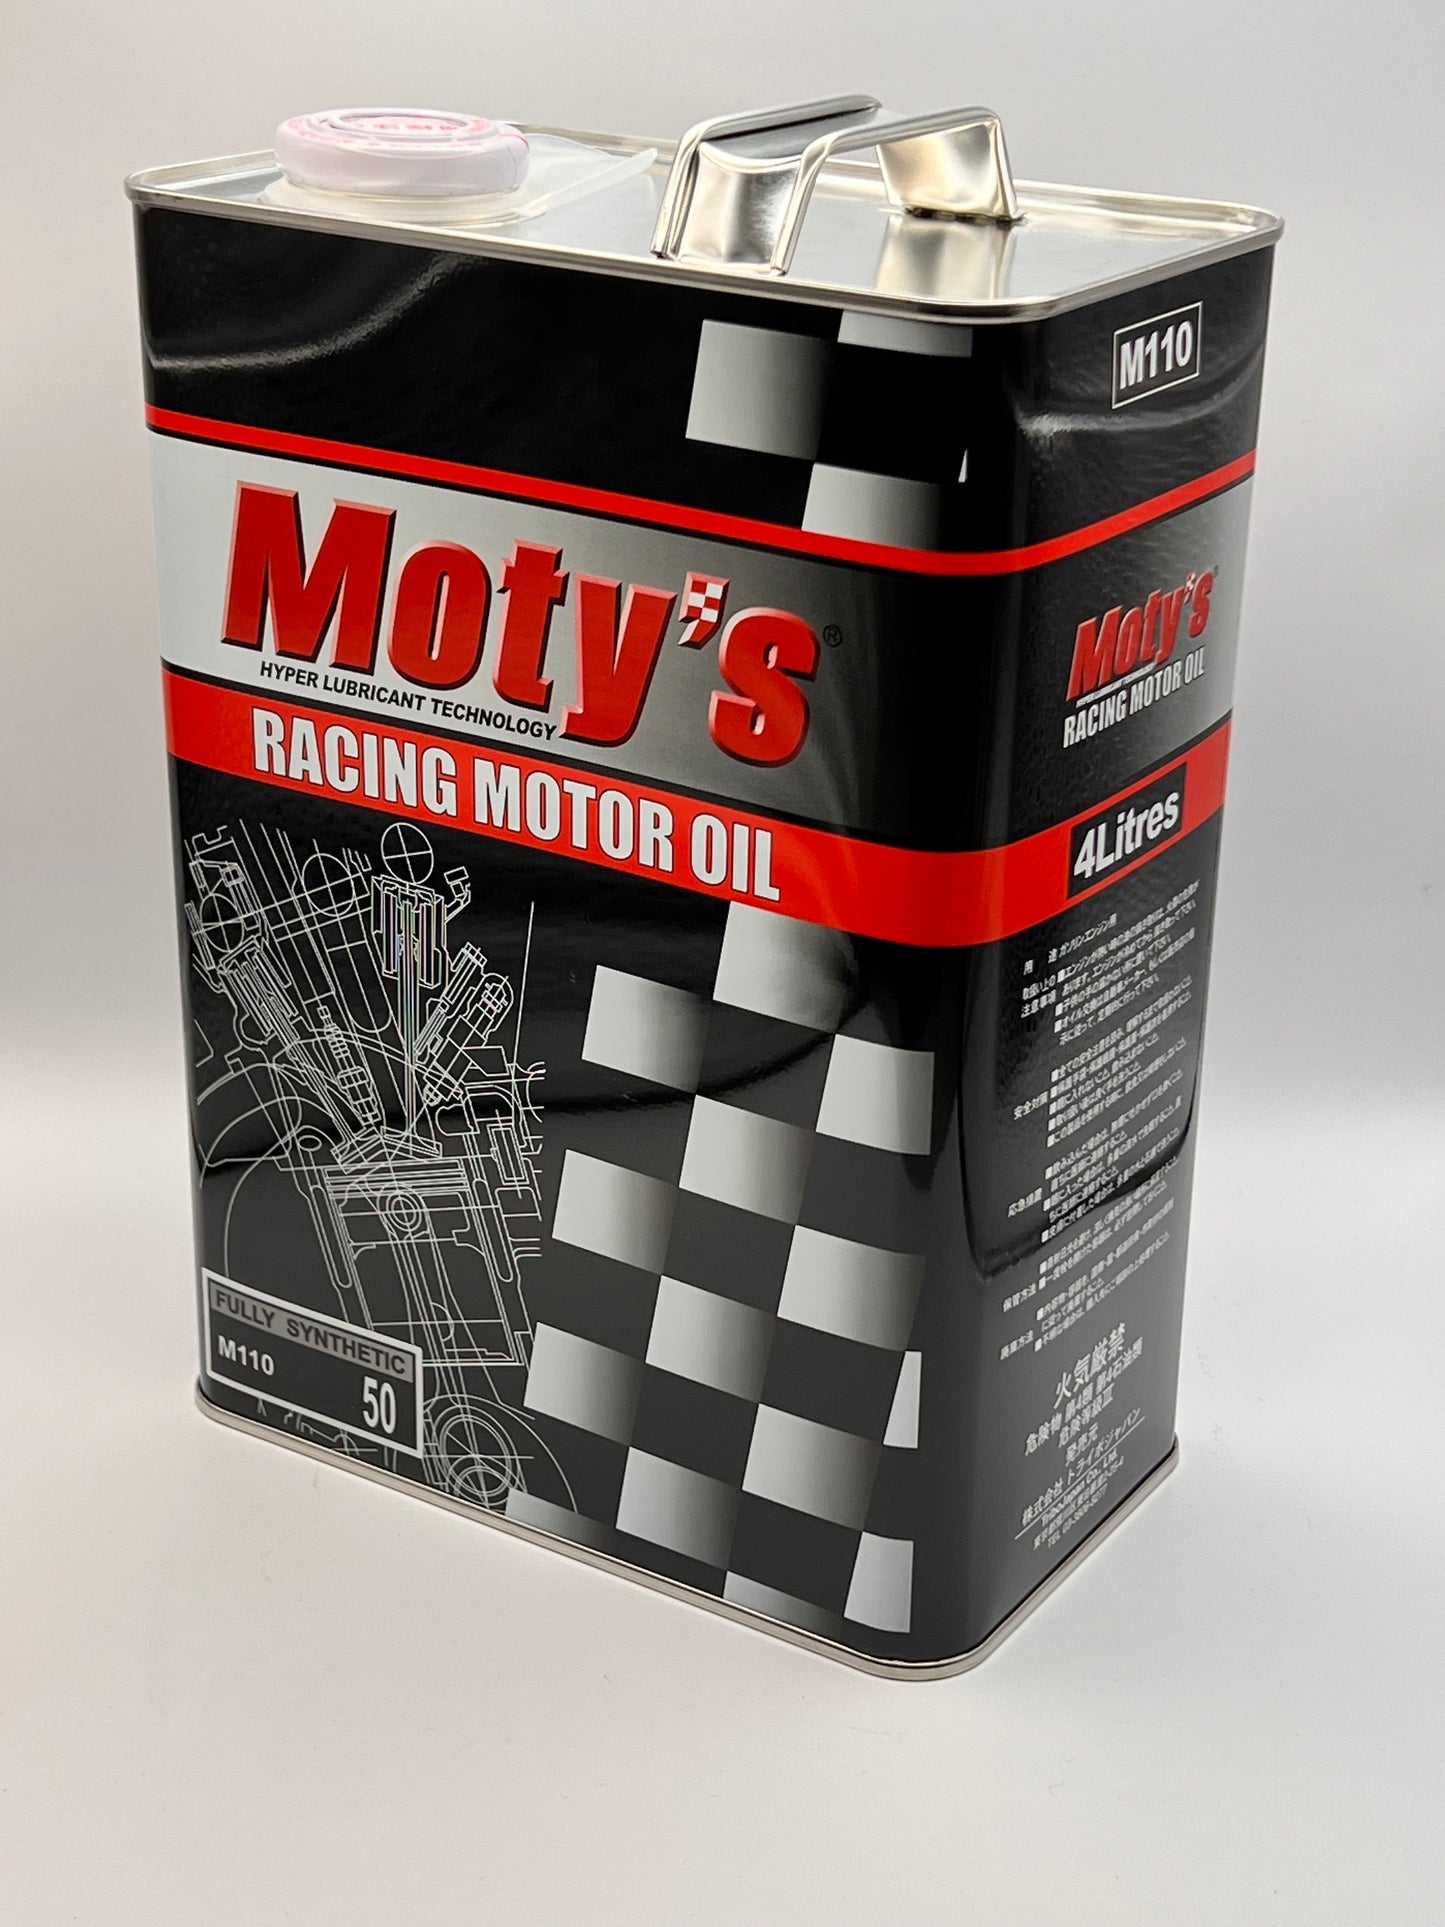 Moty's Racing Motor Oil Fully Synthetic M110-50 4 Litres